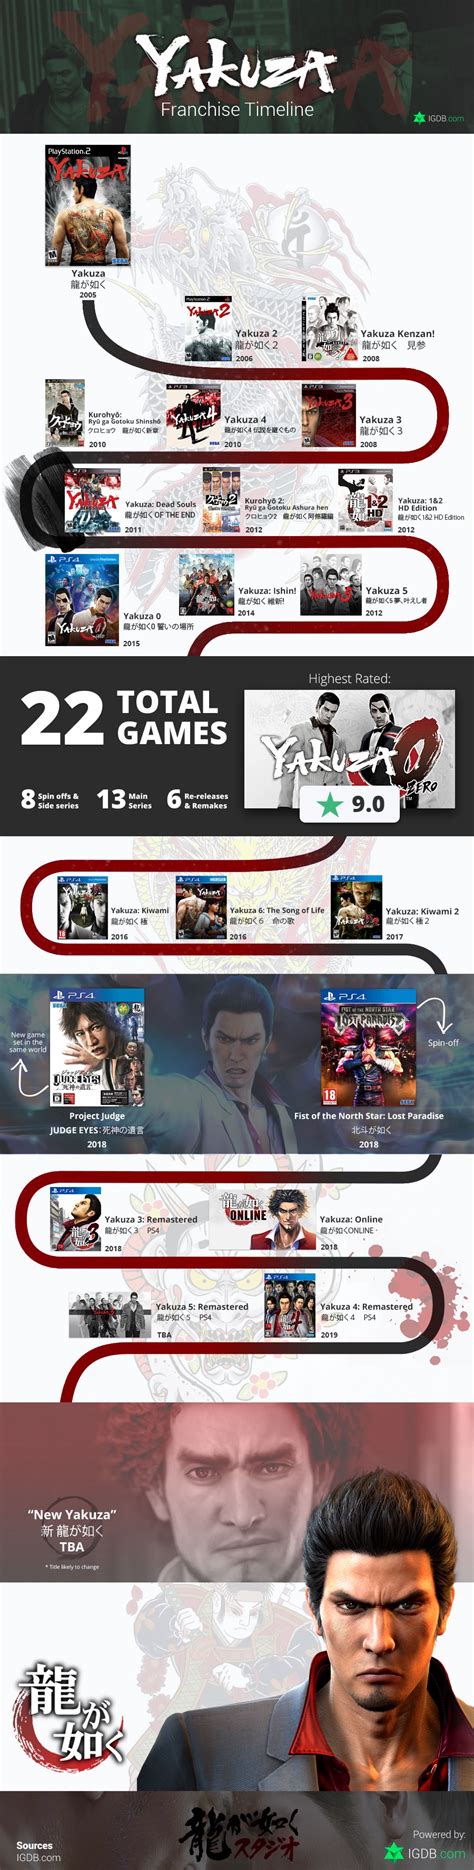 A guide to the Yakuza game franchise — with a twist